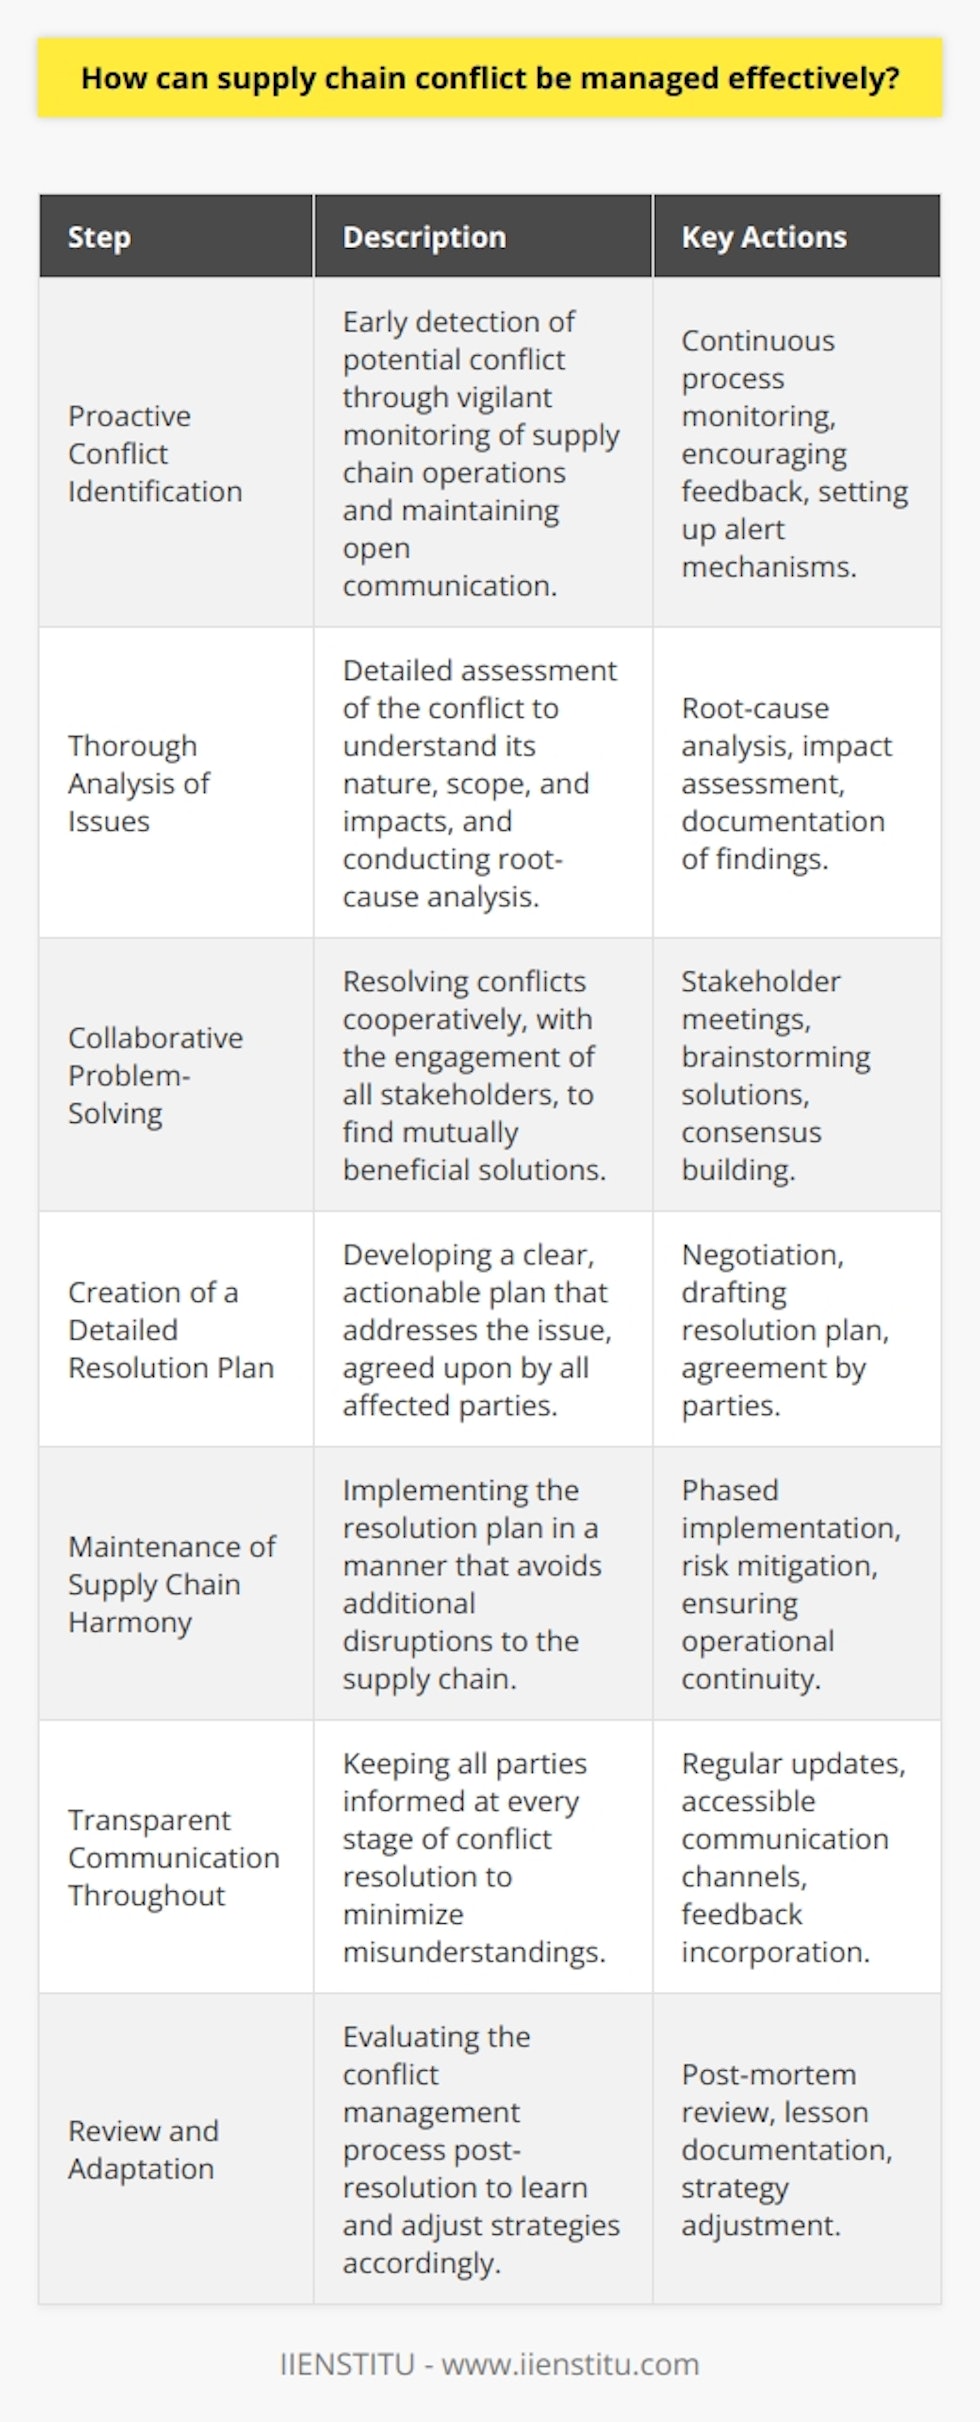 Effective management of supply chain conflict is paramount to sustaining business stability and fostering robust partnerships. Conflicts may manifest in various forms and can impact operations irrespective of whether they originate internally, from misaligned objectives among departments, or externally, due to issues with suppliers or distribution channels.To manage supply chain conflict proficiently, organizations must adhere to a structured approach entailing the following critical steps:1. Proactive Conflict Identification: Vigilance is crucial in early conflict detection, which involves continuous monitoring of supply chain processes and open lines of communication. By recognizing potential sources of conflict, such as contractual misunderstandings or logistical barriers, preemptive actions can be taken before the conflict escalates.2. Thorough Analysis of Issues: Once a conflict is identified, a detailed analysis is necessary to understand the conflict's nature, scope, and potential impacts. This could also involve a root-cause analysis to ascertain the fundamental reasons behind the discord. By thoroughly assessing the situation, organizations can avoid recurrence and better prepare for similar challenges in the future.3. Collaborative Problem-Solving: Supply chain conflict resolution should not be viewed as a zero-sum game but, rather, an opportunity for cooperative problem-solving. Engaging all stakeholders in the resolution process promotes understanding and makes it more likely to arrive at a sustainable and mutually beneficial solution.4. Creation of a Detailed Resolution Plan: After dialogue and negotiation, it's vital to develop a clear, actionable plan to address the issue. A consensus-driven plan could involve measures such as reallocating responsibilities, revising schedules, or modifying contracts. Crucially, the resolution plan should be agreed upon by all affected parties.5. Maintenance of Supply Chain Harmony: Implementation of the resolution plan must avoid causing further supply chain disruptions. This might require phased changes, risk mitigation strategies, or temporary measures to ensure continuity of operations, all designed to preserve the integrity of the supply chain.6. Transparent Communication Throughout: Clear and ongoing communication is the bedrock of any conflict resolution effort. By keeping all parties informed at every stage, misunderstandings can be minimized. Furthermore, the use of a harmonized communication platform ensures that all relevant stakeholders can access updates and voice their concerns. 7. Review and Adaptation: Post-resolution, a review of the conflict management process should be undertaken to glean lessons and make any necessary adjustments to the supply chain strategy. This encourages continuous improvement and can serve to strengthen relationships between supply chain partners.Incorporating these principles into a supply chain conflict management strategy can enhance resilience and adaptability. Conflict is an opportunity for learning and optimization when approached with a structured and collaborative mindset. By applying these measures diligently, organizations can expect to navigate the complexities of supply chain management more smoothly, retaining competitive edge in an ever-changing business landscape.